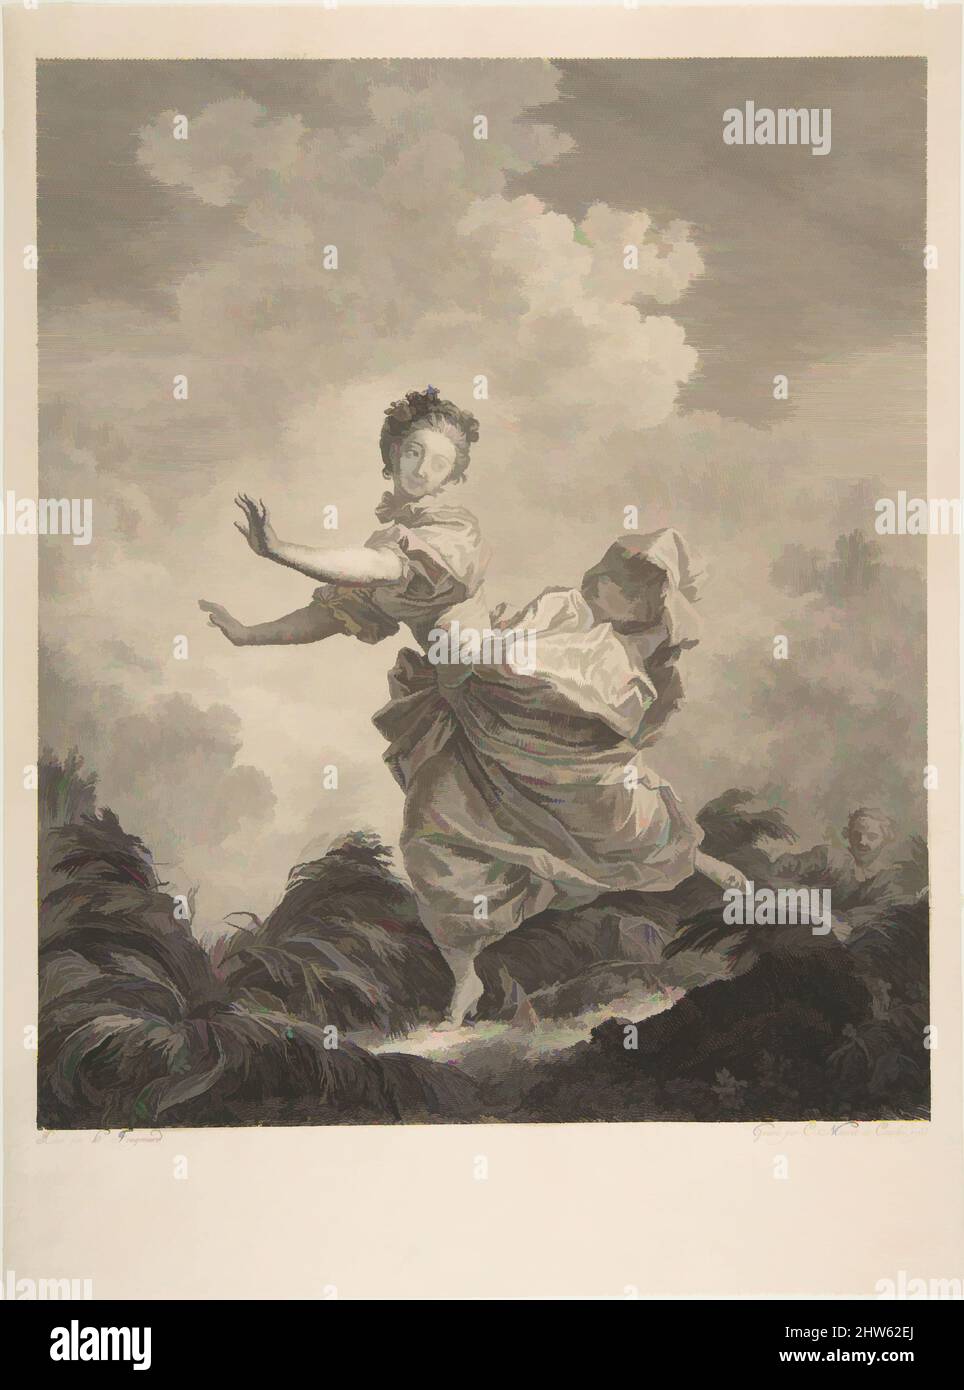 Art inspired by La Fuite a Dessein, n.d., Etching, first state, sheet: 14 x 10 3/8 in. (35.5 x 26.4 cm), Prints, After Jean Honoré Fragonard (French, Grasse 1732–1806 Paris), Engraved by Jacques Couché (French, born 1750), Engraved by Charles François Adrien Macret (French, Abbeville, Classic works modernized by Artotop with a splash of modernity. Shapes, color and value, eye-catching visual impact on art. Emotions through freedom of artworks in a contemporary way. A timeless message pursuing a wildly creative new direction. Artists turning to the digital medium and creating the Artotop NFT Stock Photo